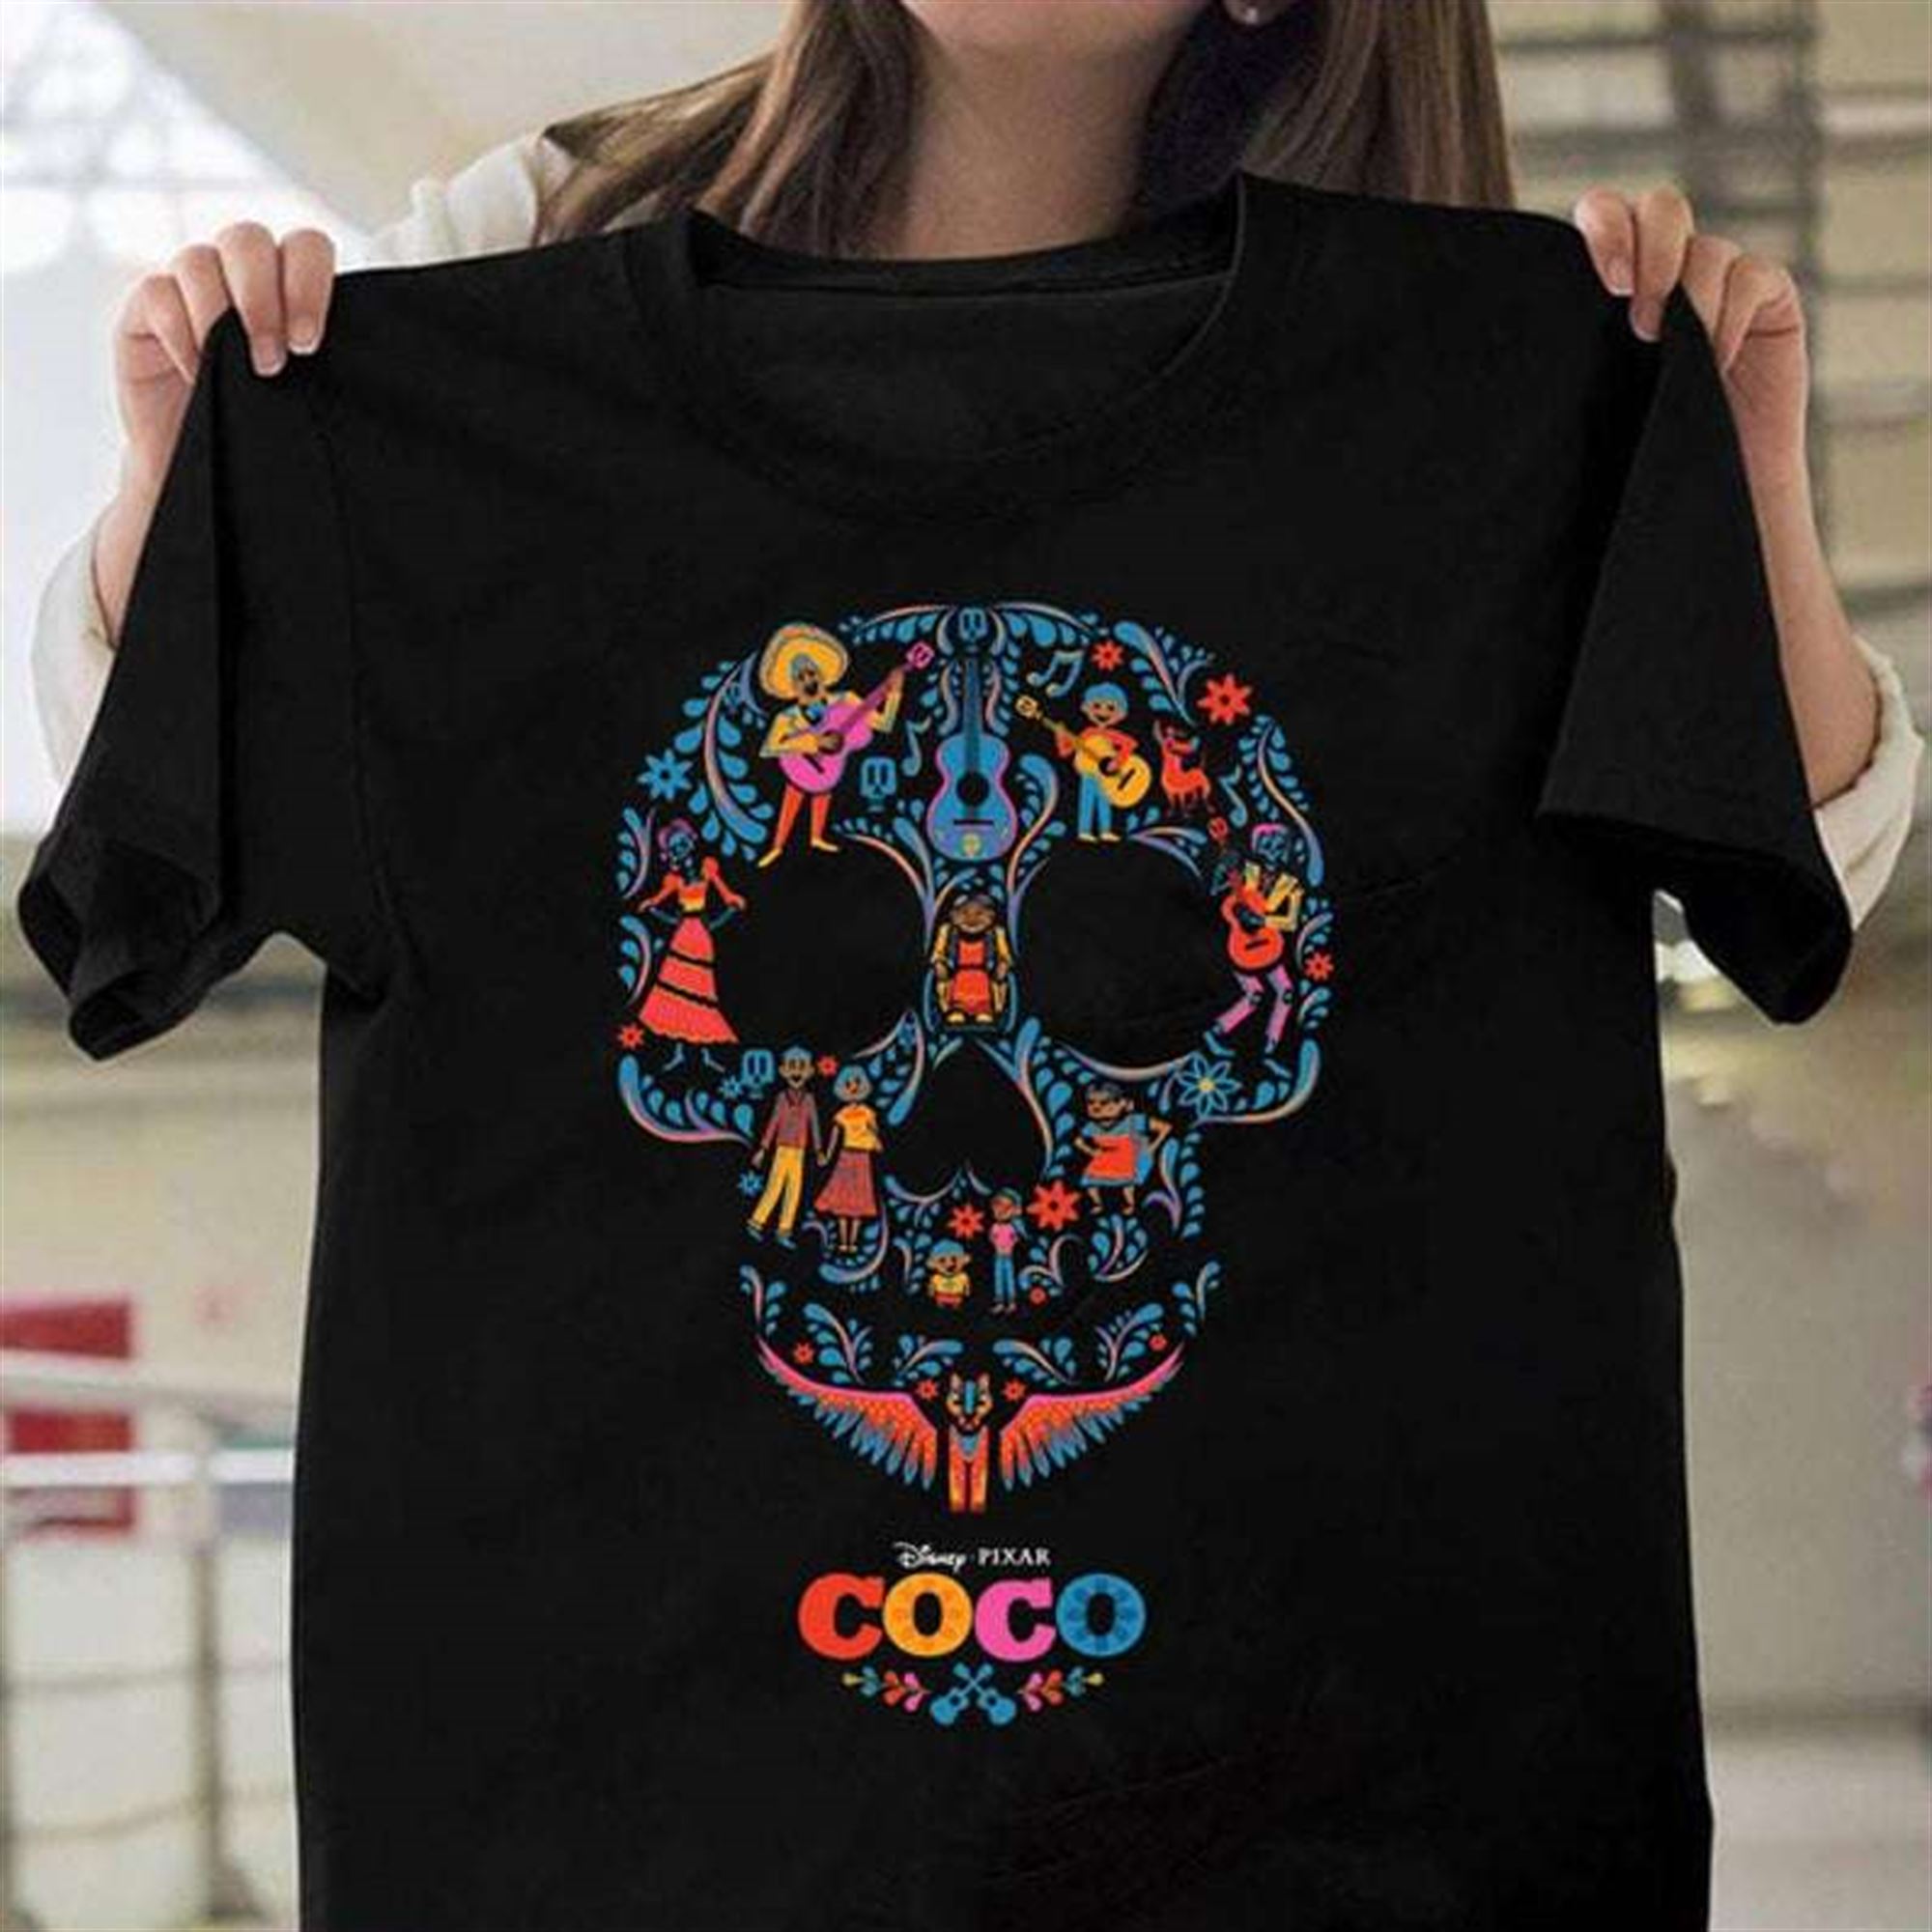 Disney Pixar Coco Colorful T Shirt Full Size Up To 5xl